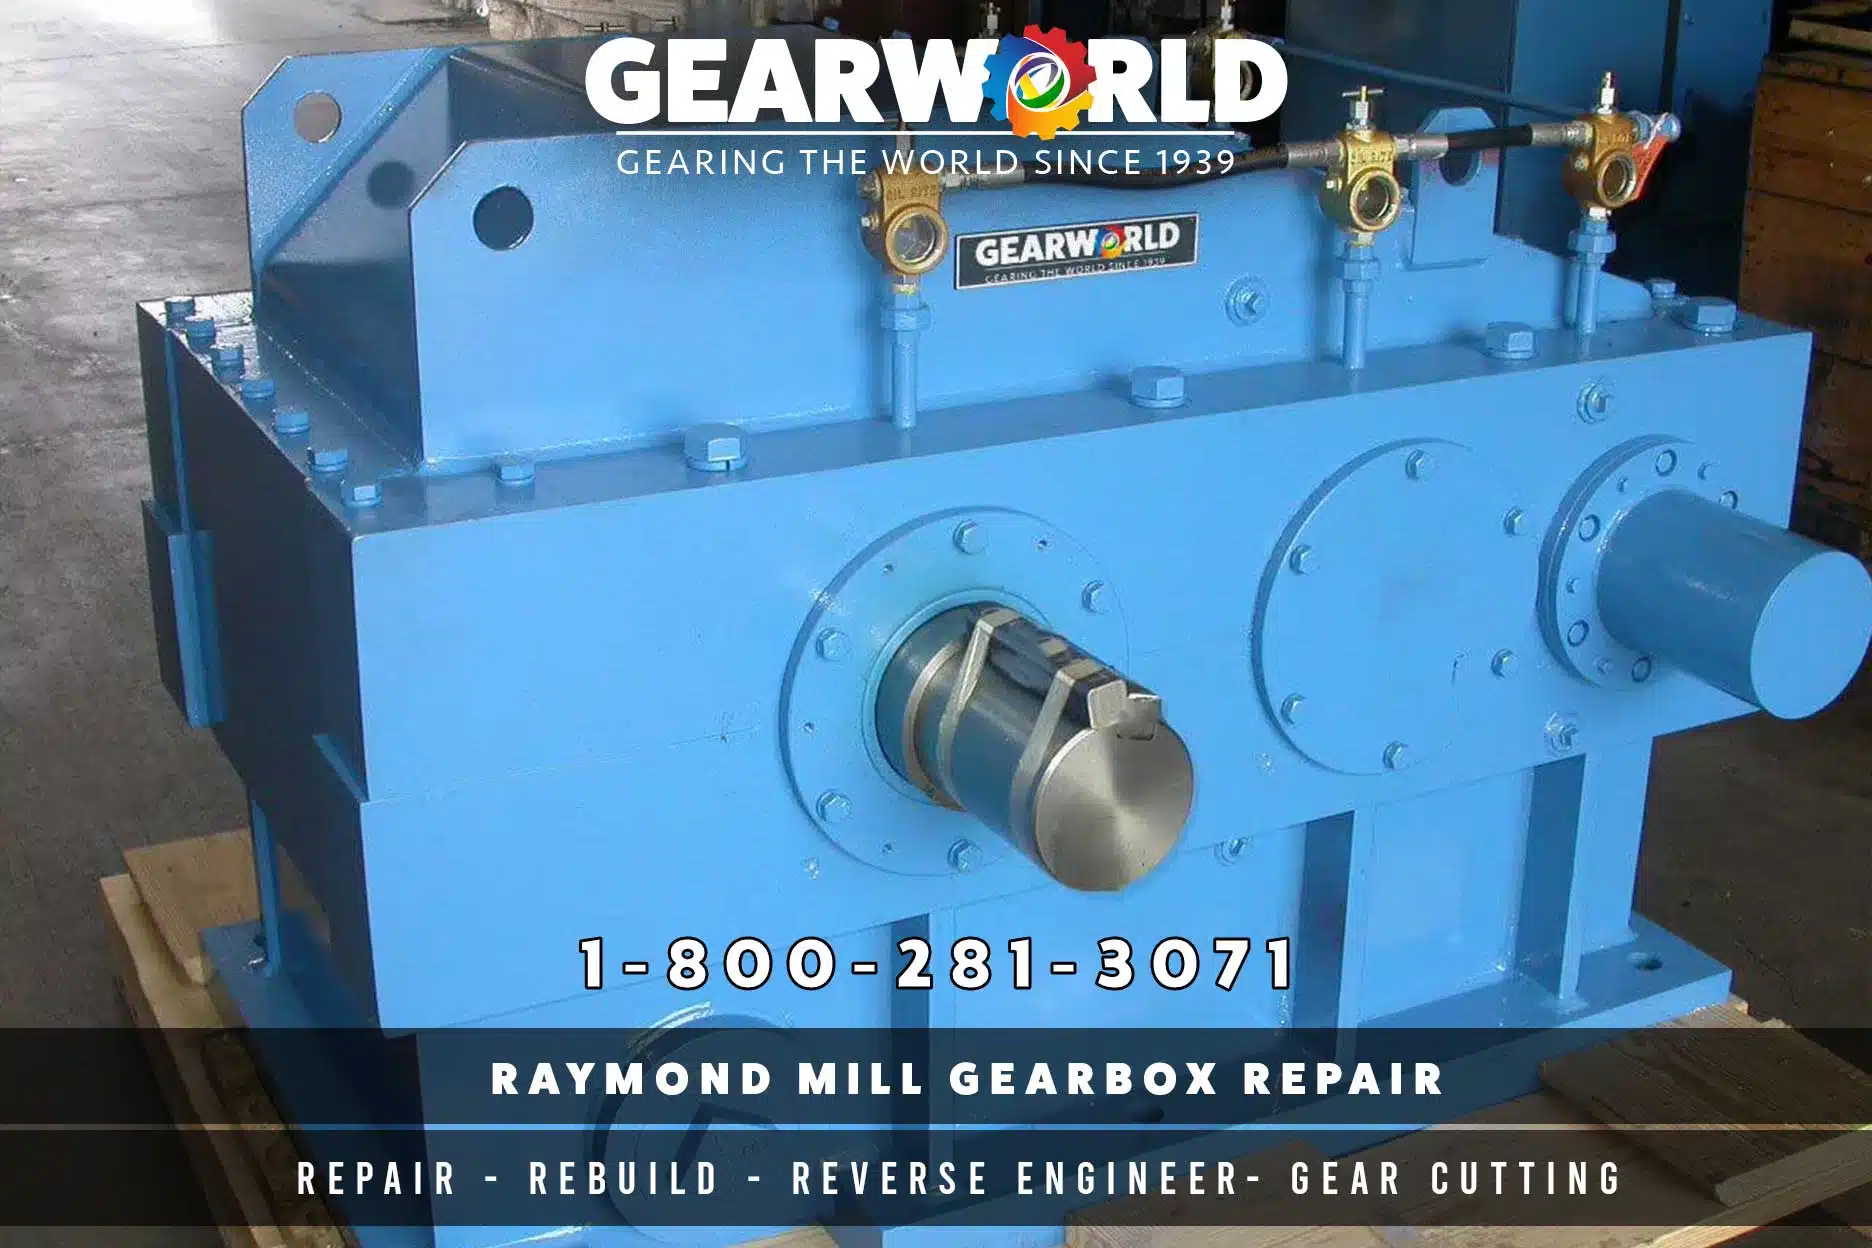 How Much Does It Cost to Repair a Gearbox?